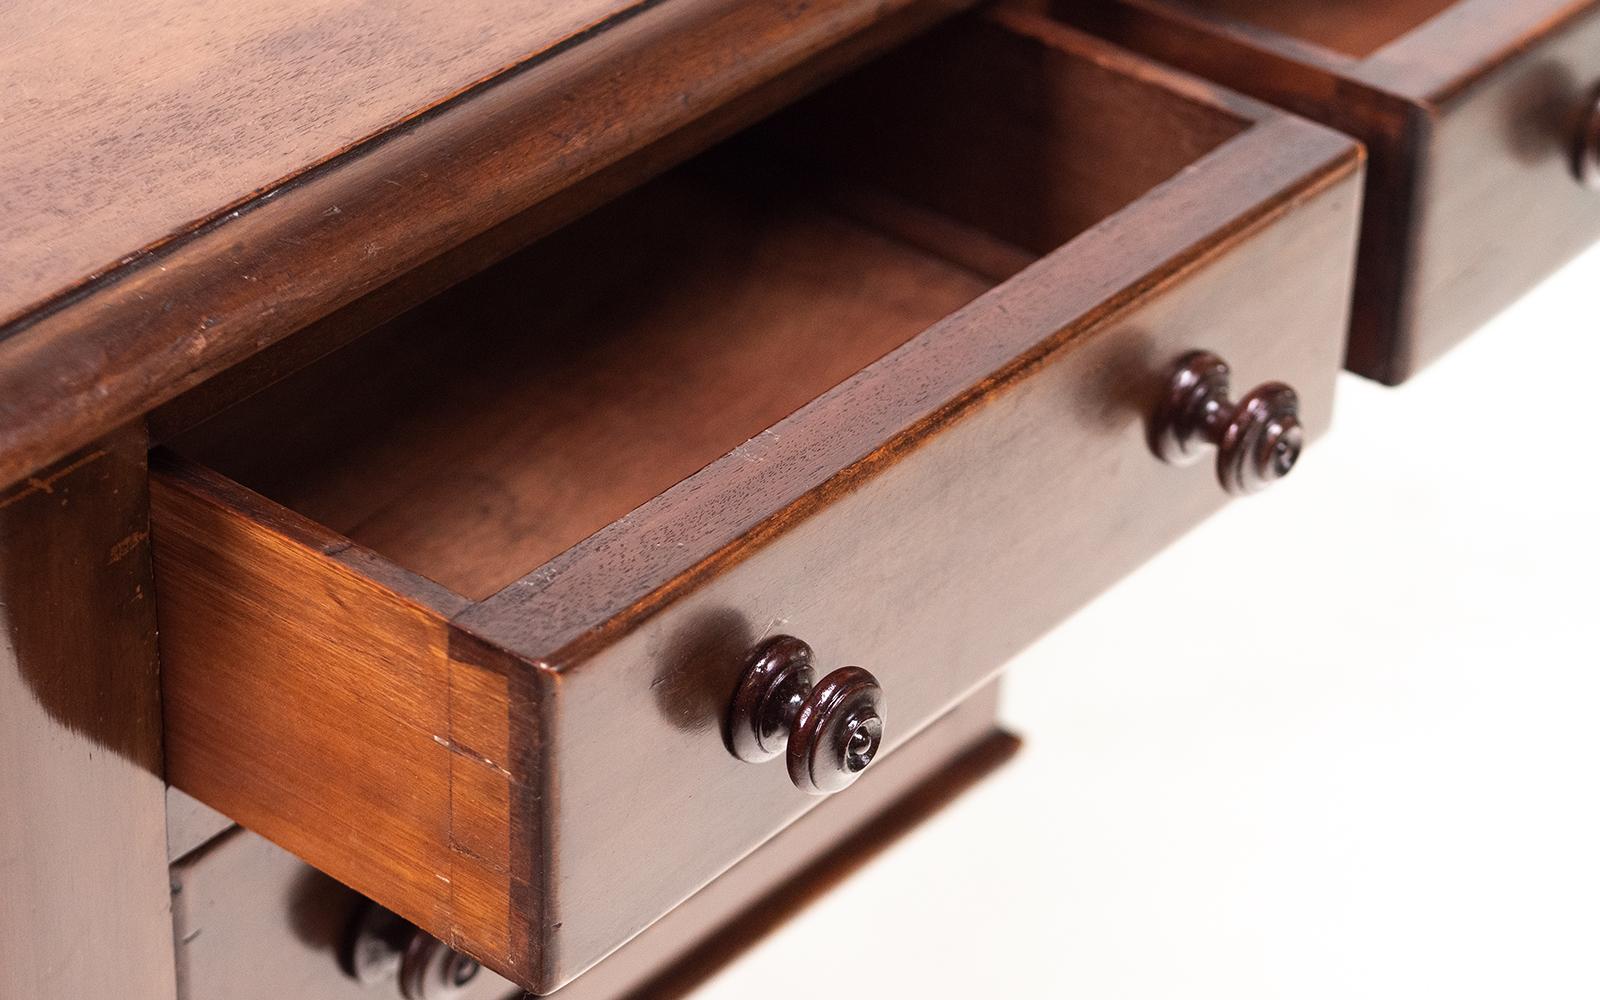 Victorian desk

Offered a British late Victorian mahogany writing desk, beautifully made with turned legs that sit on casters.

It is featuring five drawers to the front with moulded handles.